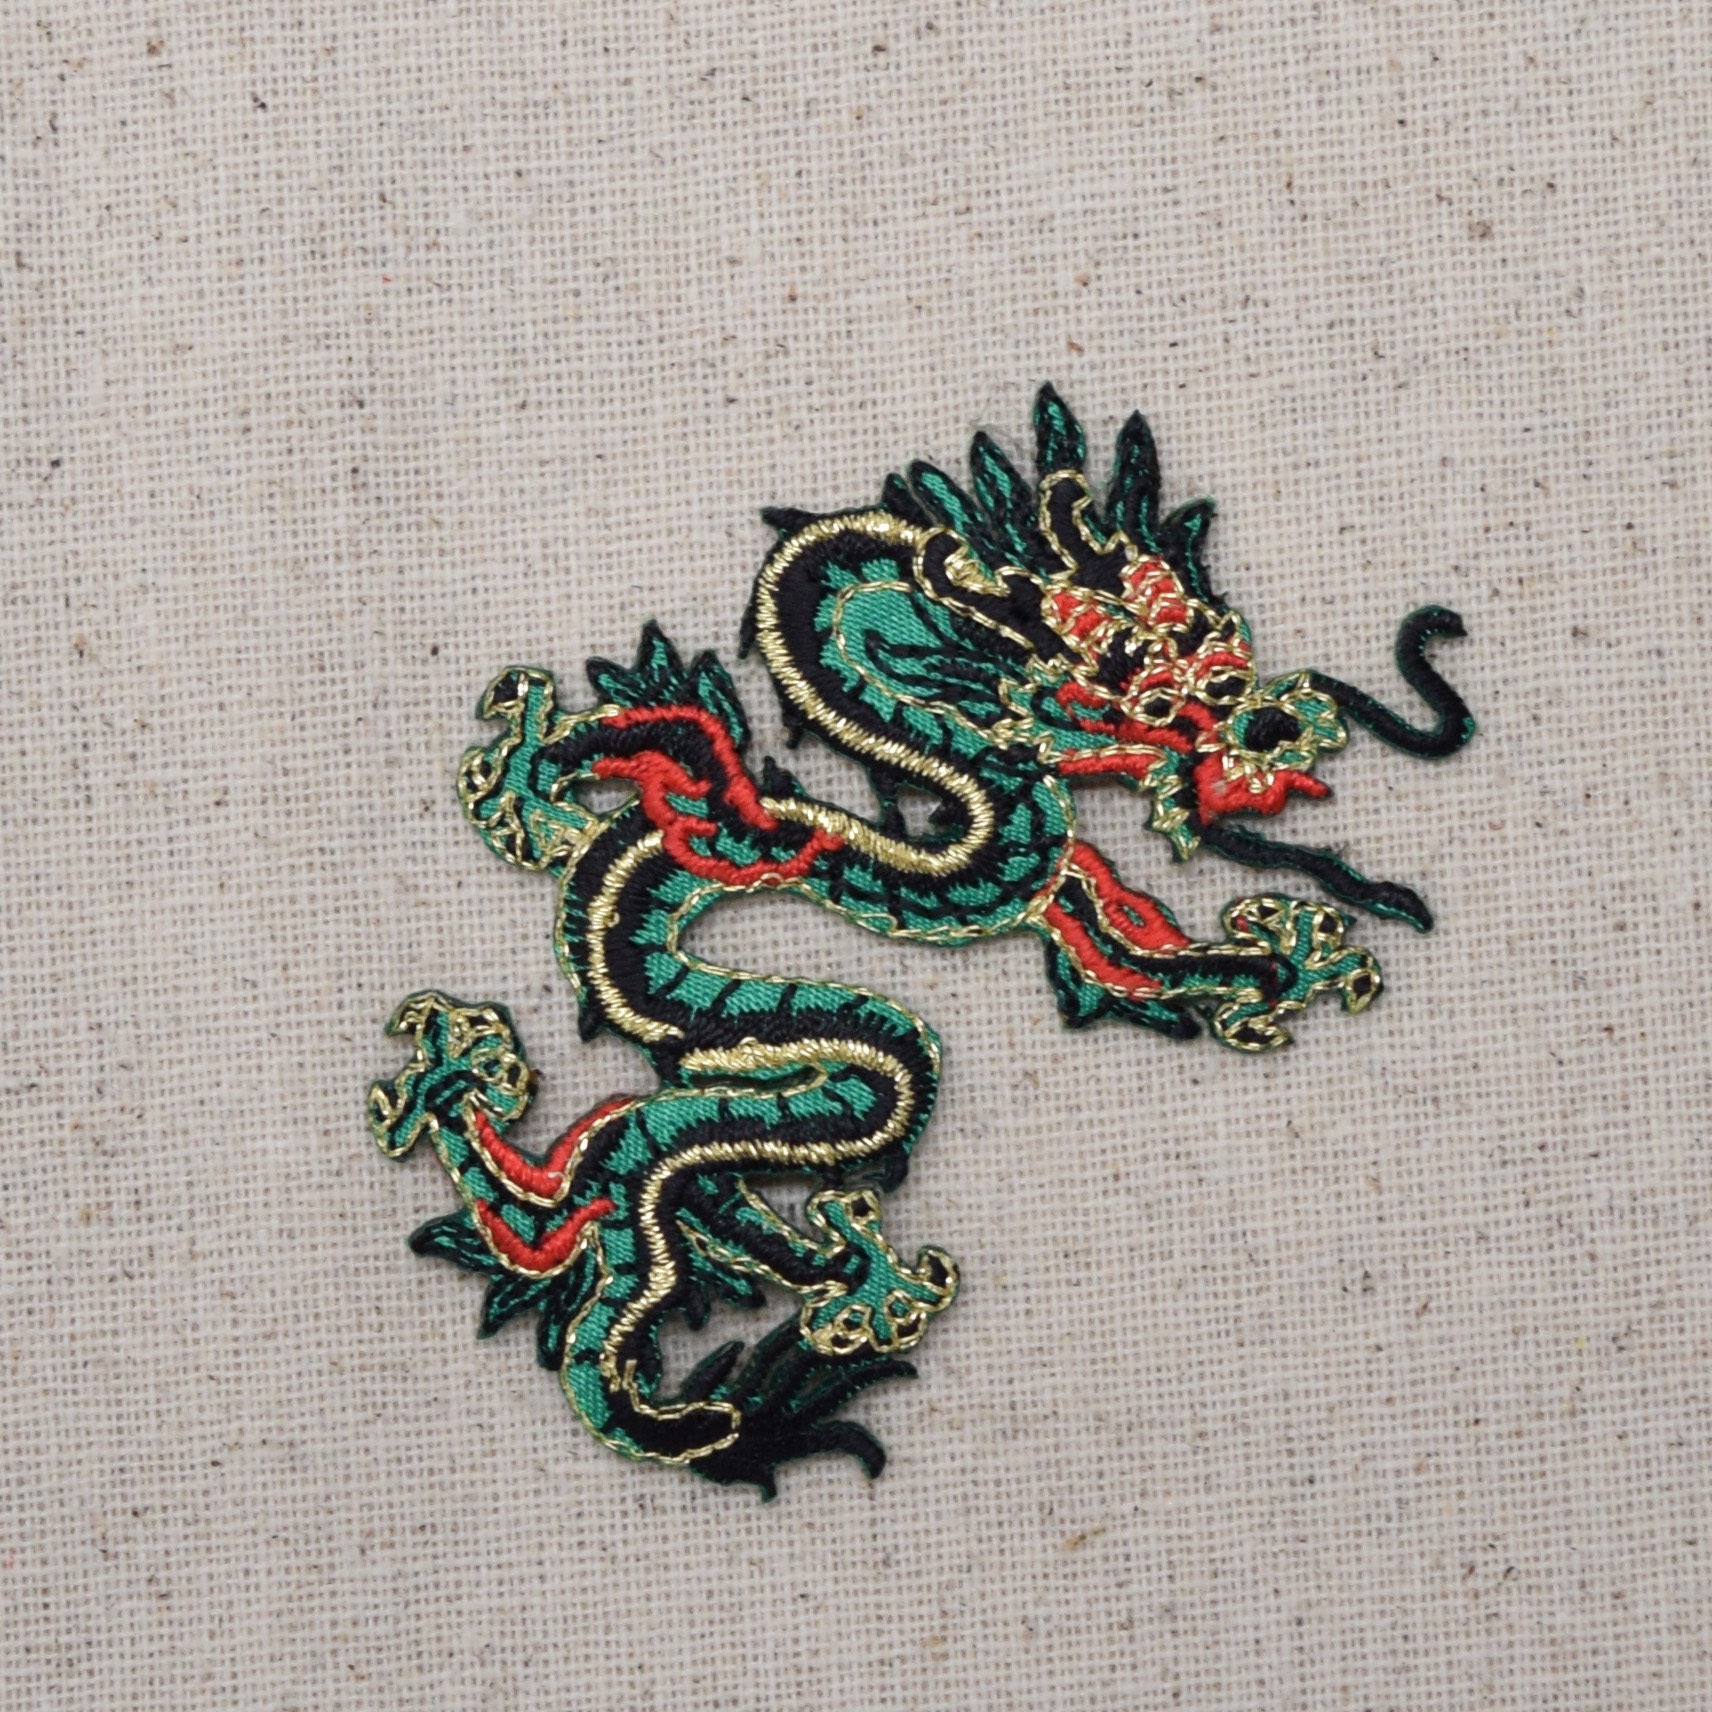 NIP Wrights Vintage Sew On Appliques Asian Dragon Patch